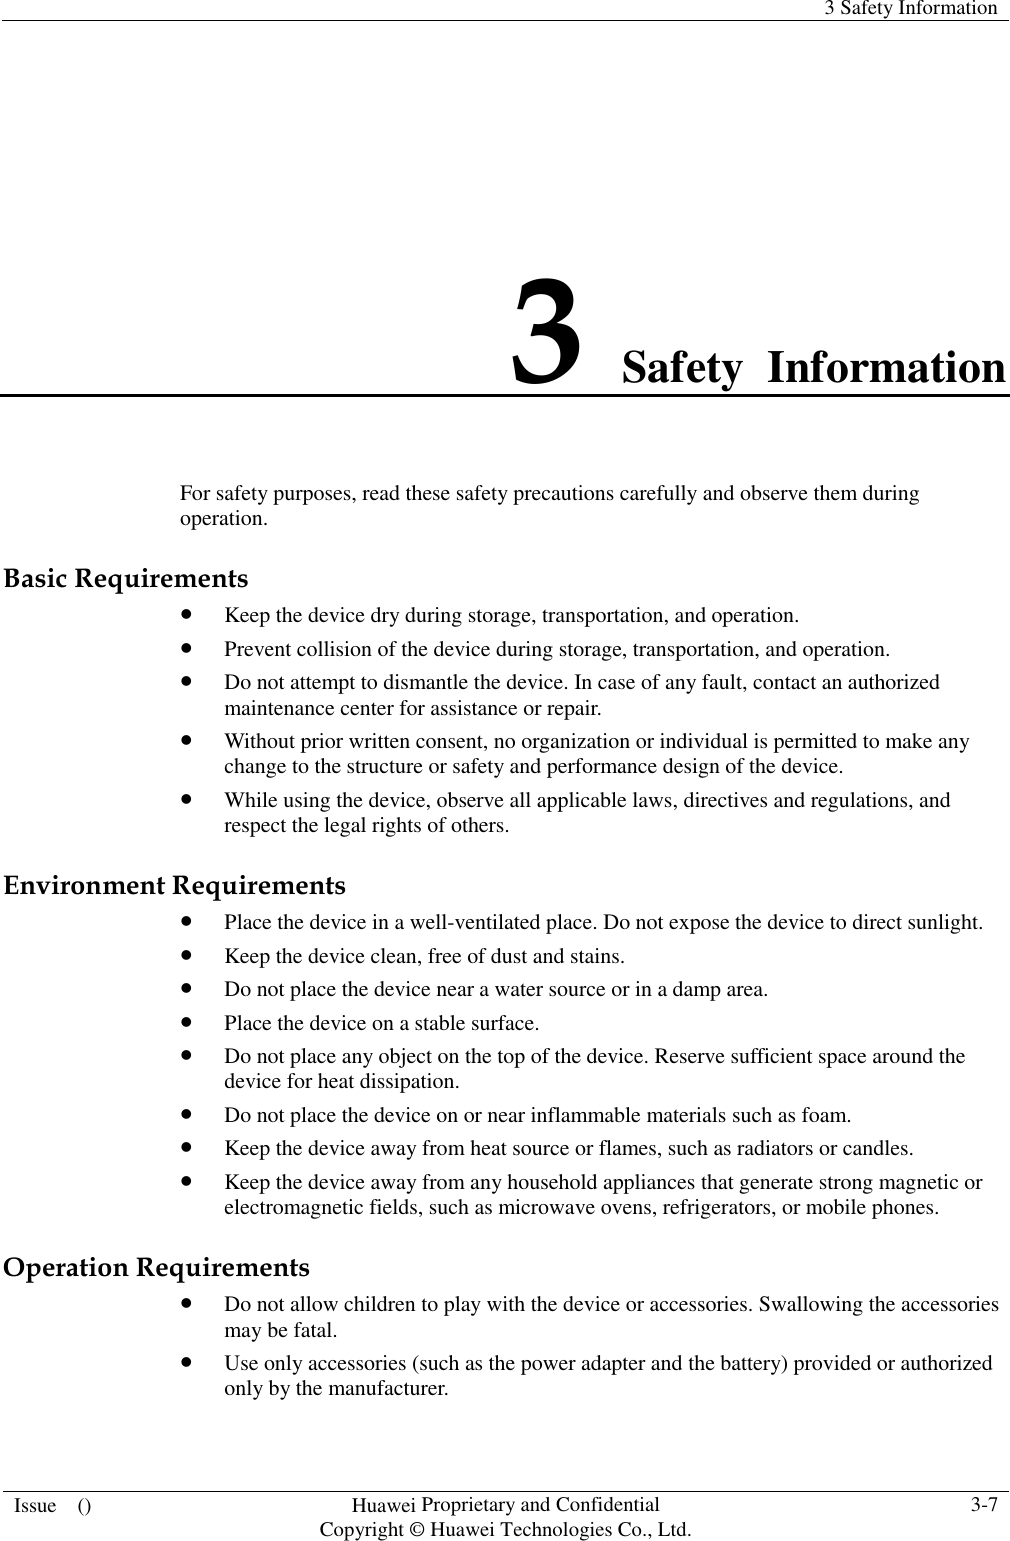    3 Safety Information  Issue    ()  Huawei Proprietary and Confidential                                     Copyright © Huawei Technologies Co., Ltd.  3-7   3 Safety  Information For safety purposes, read these safety precautions carefully and observe them during operation. Basic Requirements  Keep the device dry during storage, transportation, and operation.  Prevent collision of the device during storage, transportation, and operation.  Do not attempt to dismantle the device. In case of any fault, contact an authorized maintenance center for assistance or repair.  Without prior written consent, no organization or individual is permitted to make any change to the structure or safety and performance design of the device.  While using the device, observe all applicable laws, directives and regulations, and respect the legal rights of others. Environment Requirements  Place the device in a well-ventilated place. Do not expose the device to direct sunlight.  Keep the device clean, free of dust and stains.  Do not place the device near a water source or in a damp area.  Place the device on a stable surface.  Do not place any object on the top of the device. Reserve sufficient space around the device for heat dissipation.  Do not place the device on or near inflammable materials such as foam.  Keep the device away from heat source or flames, such as radiators or candles.  Keep the device away from any household appliances that generate strong magnetic or electromagnetic fields, such as microwave ovens, refrigerators, or mobile phones. Operation Requirements  Do not allow children to play with the device or accessories. Swallowing the accessories may be fatal.  Use only accessories (such as the power adapter and the battery) provided or authorized only by the manufacturer. 